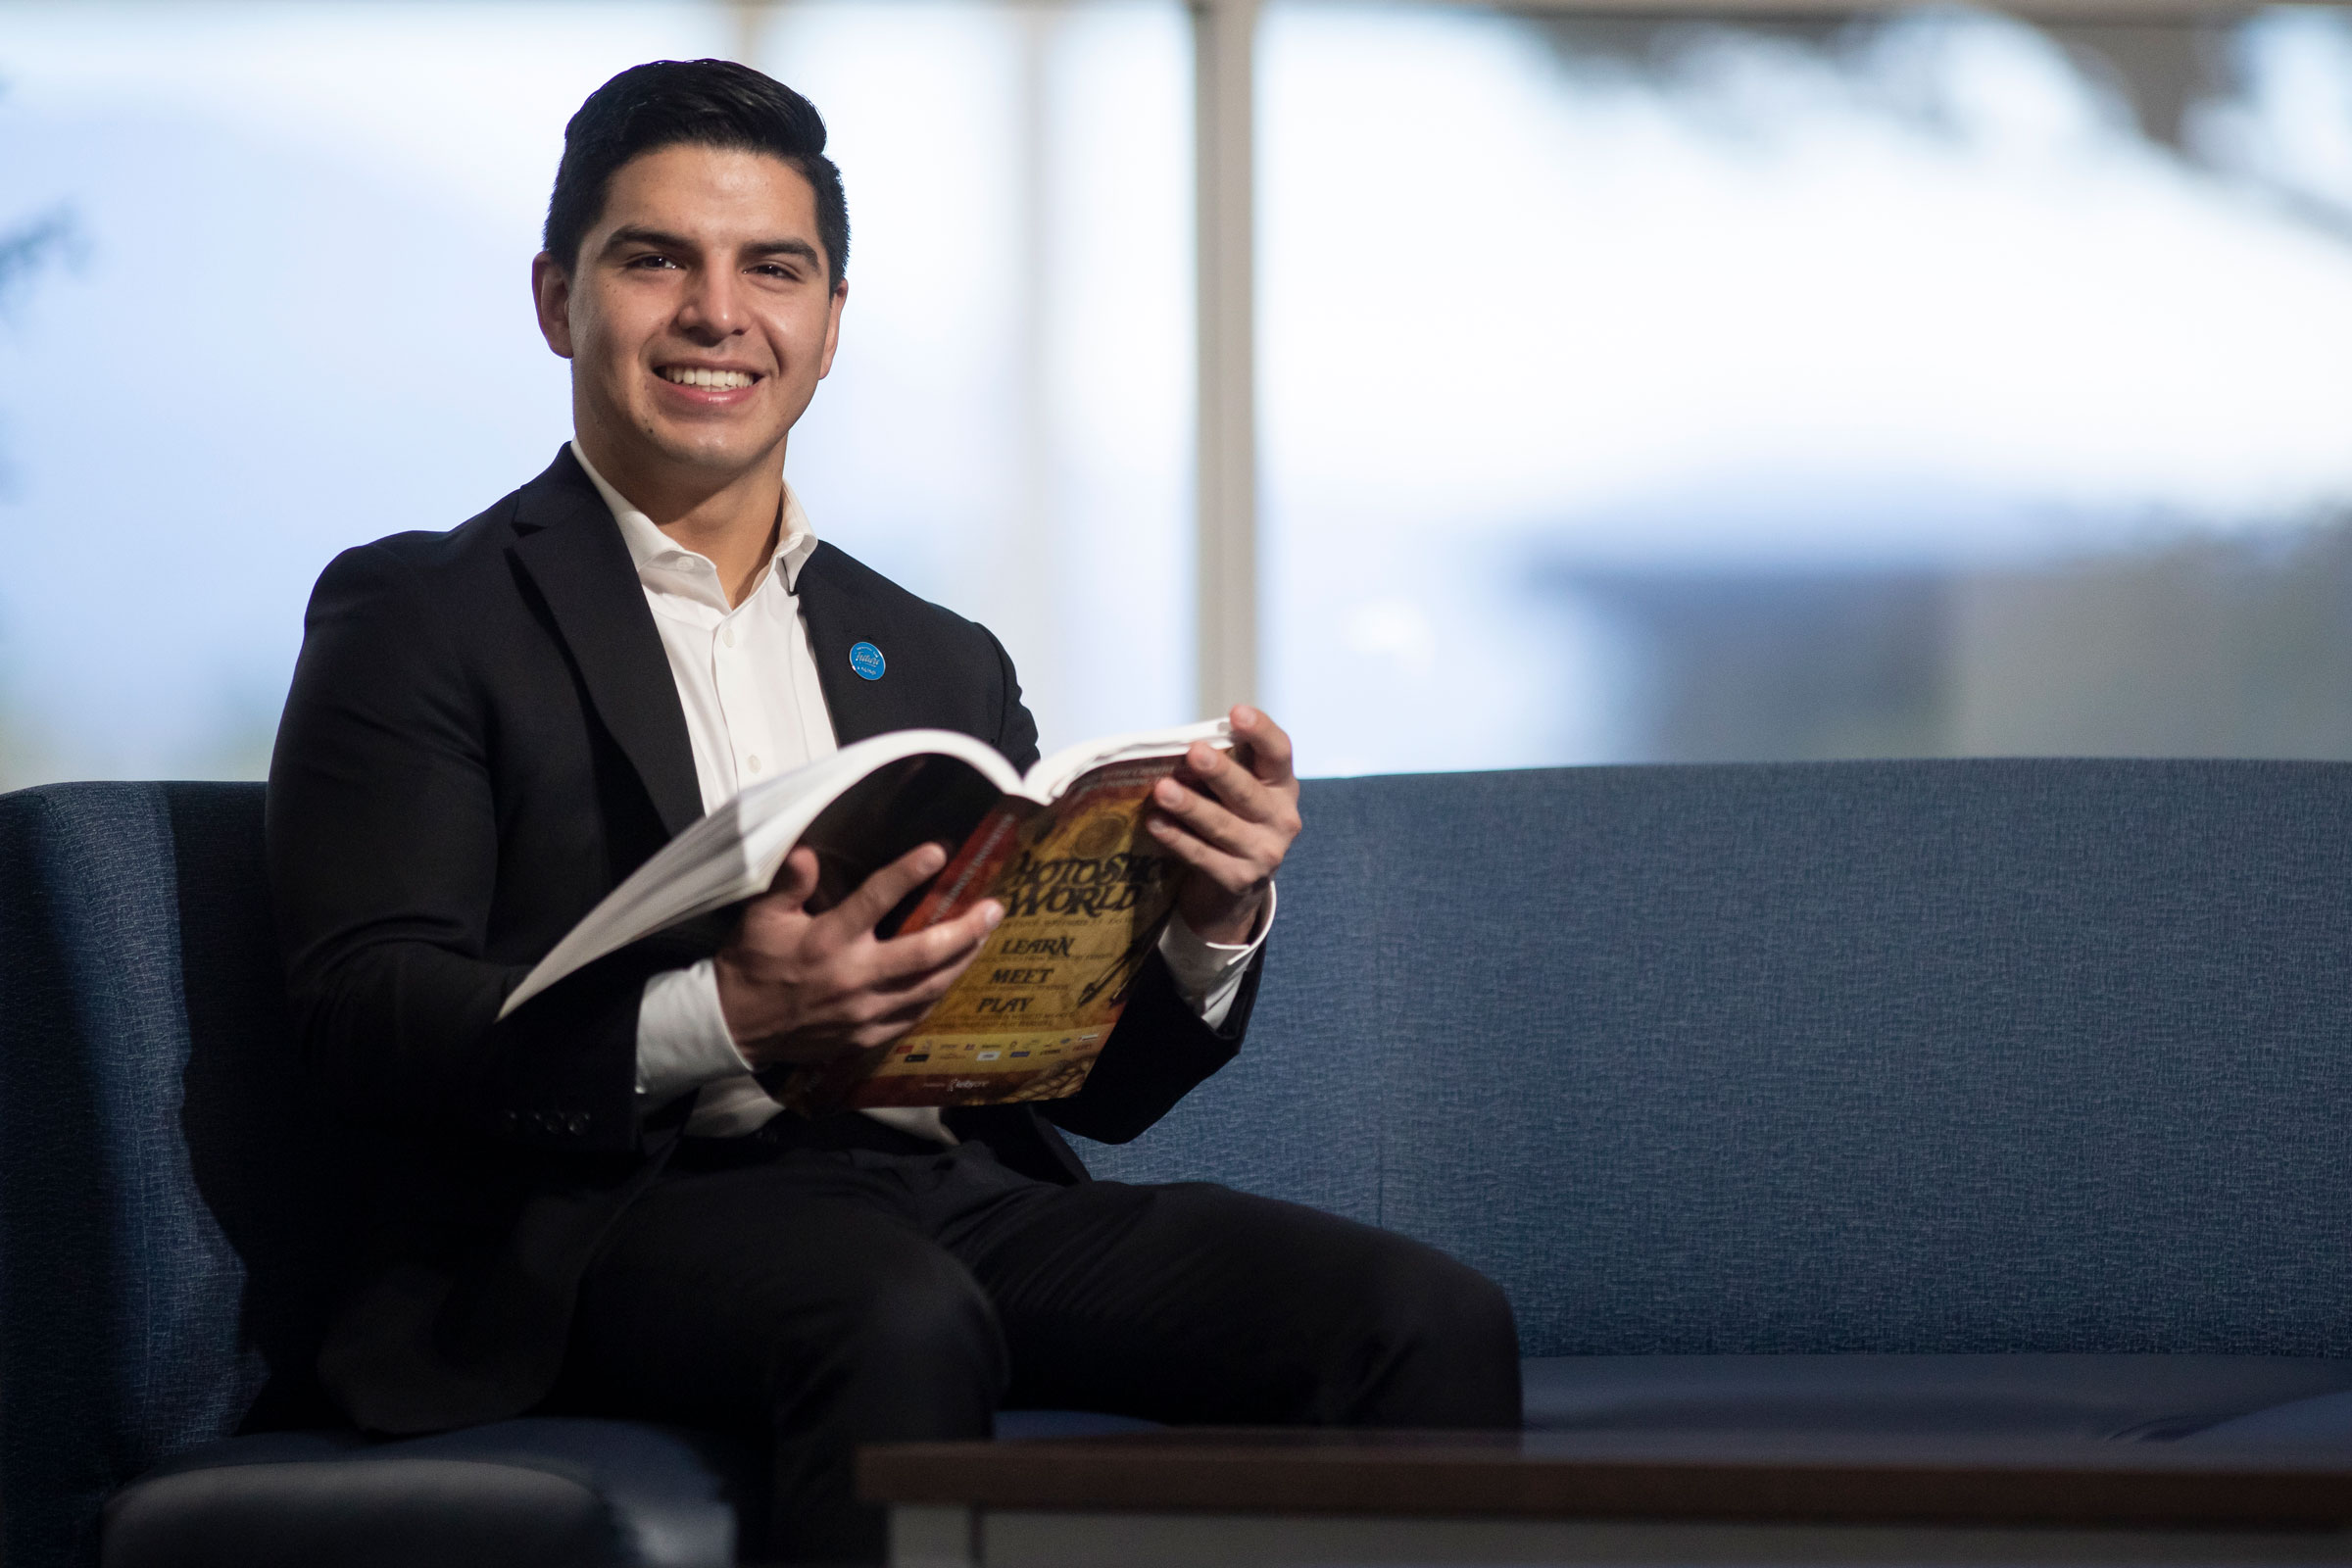 Emmanuel Castaneda '23, alumnus of CSUSB's Jack H. Brown College of Business and Public Administration